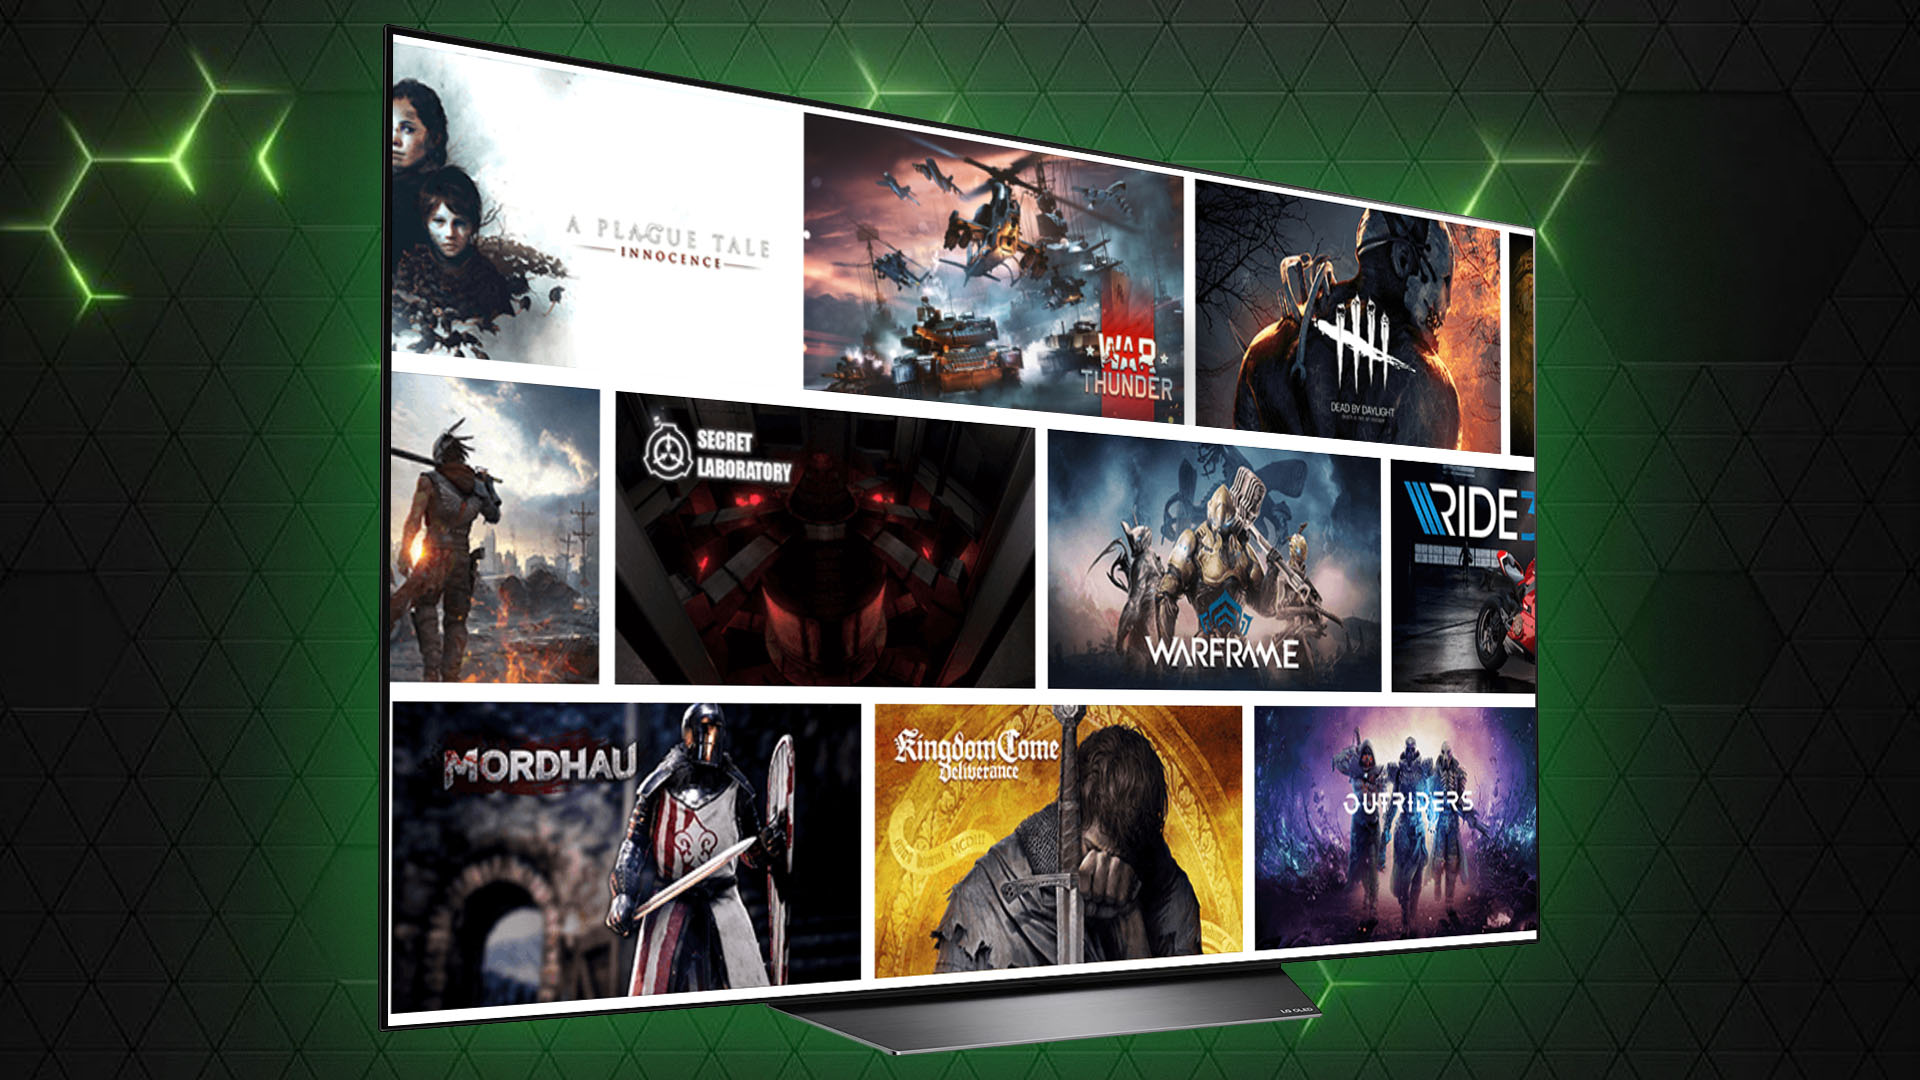 Nvidia’s GeForce Now will stream PC games directly to LG TVs